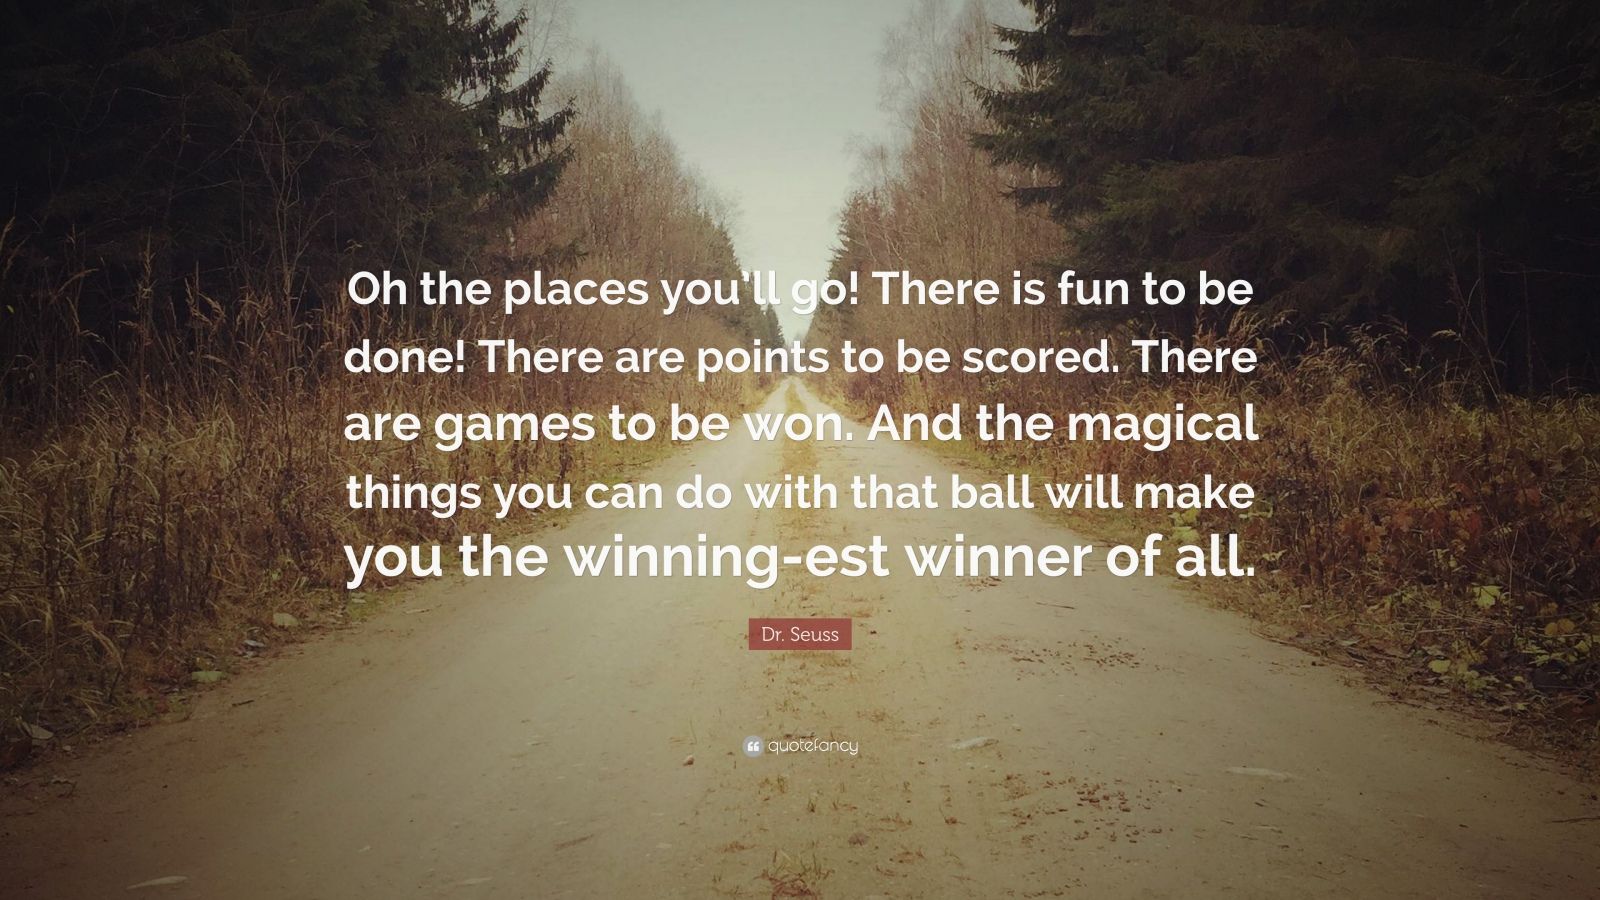 Dr. Seuss Quote: “Oh the places you’ll go! There is fun to be done